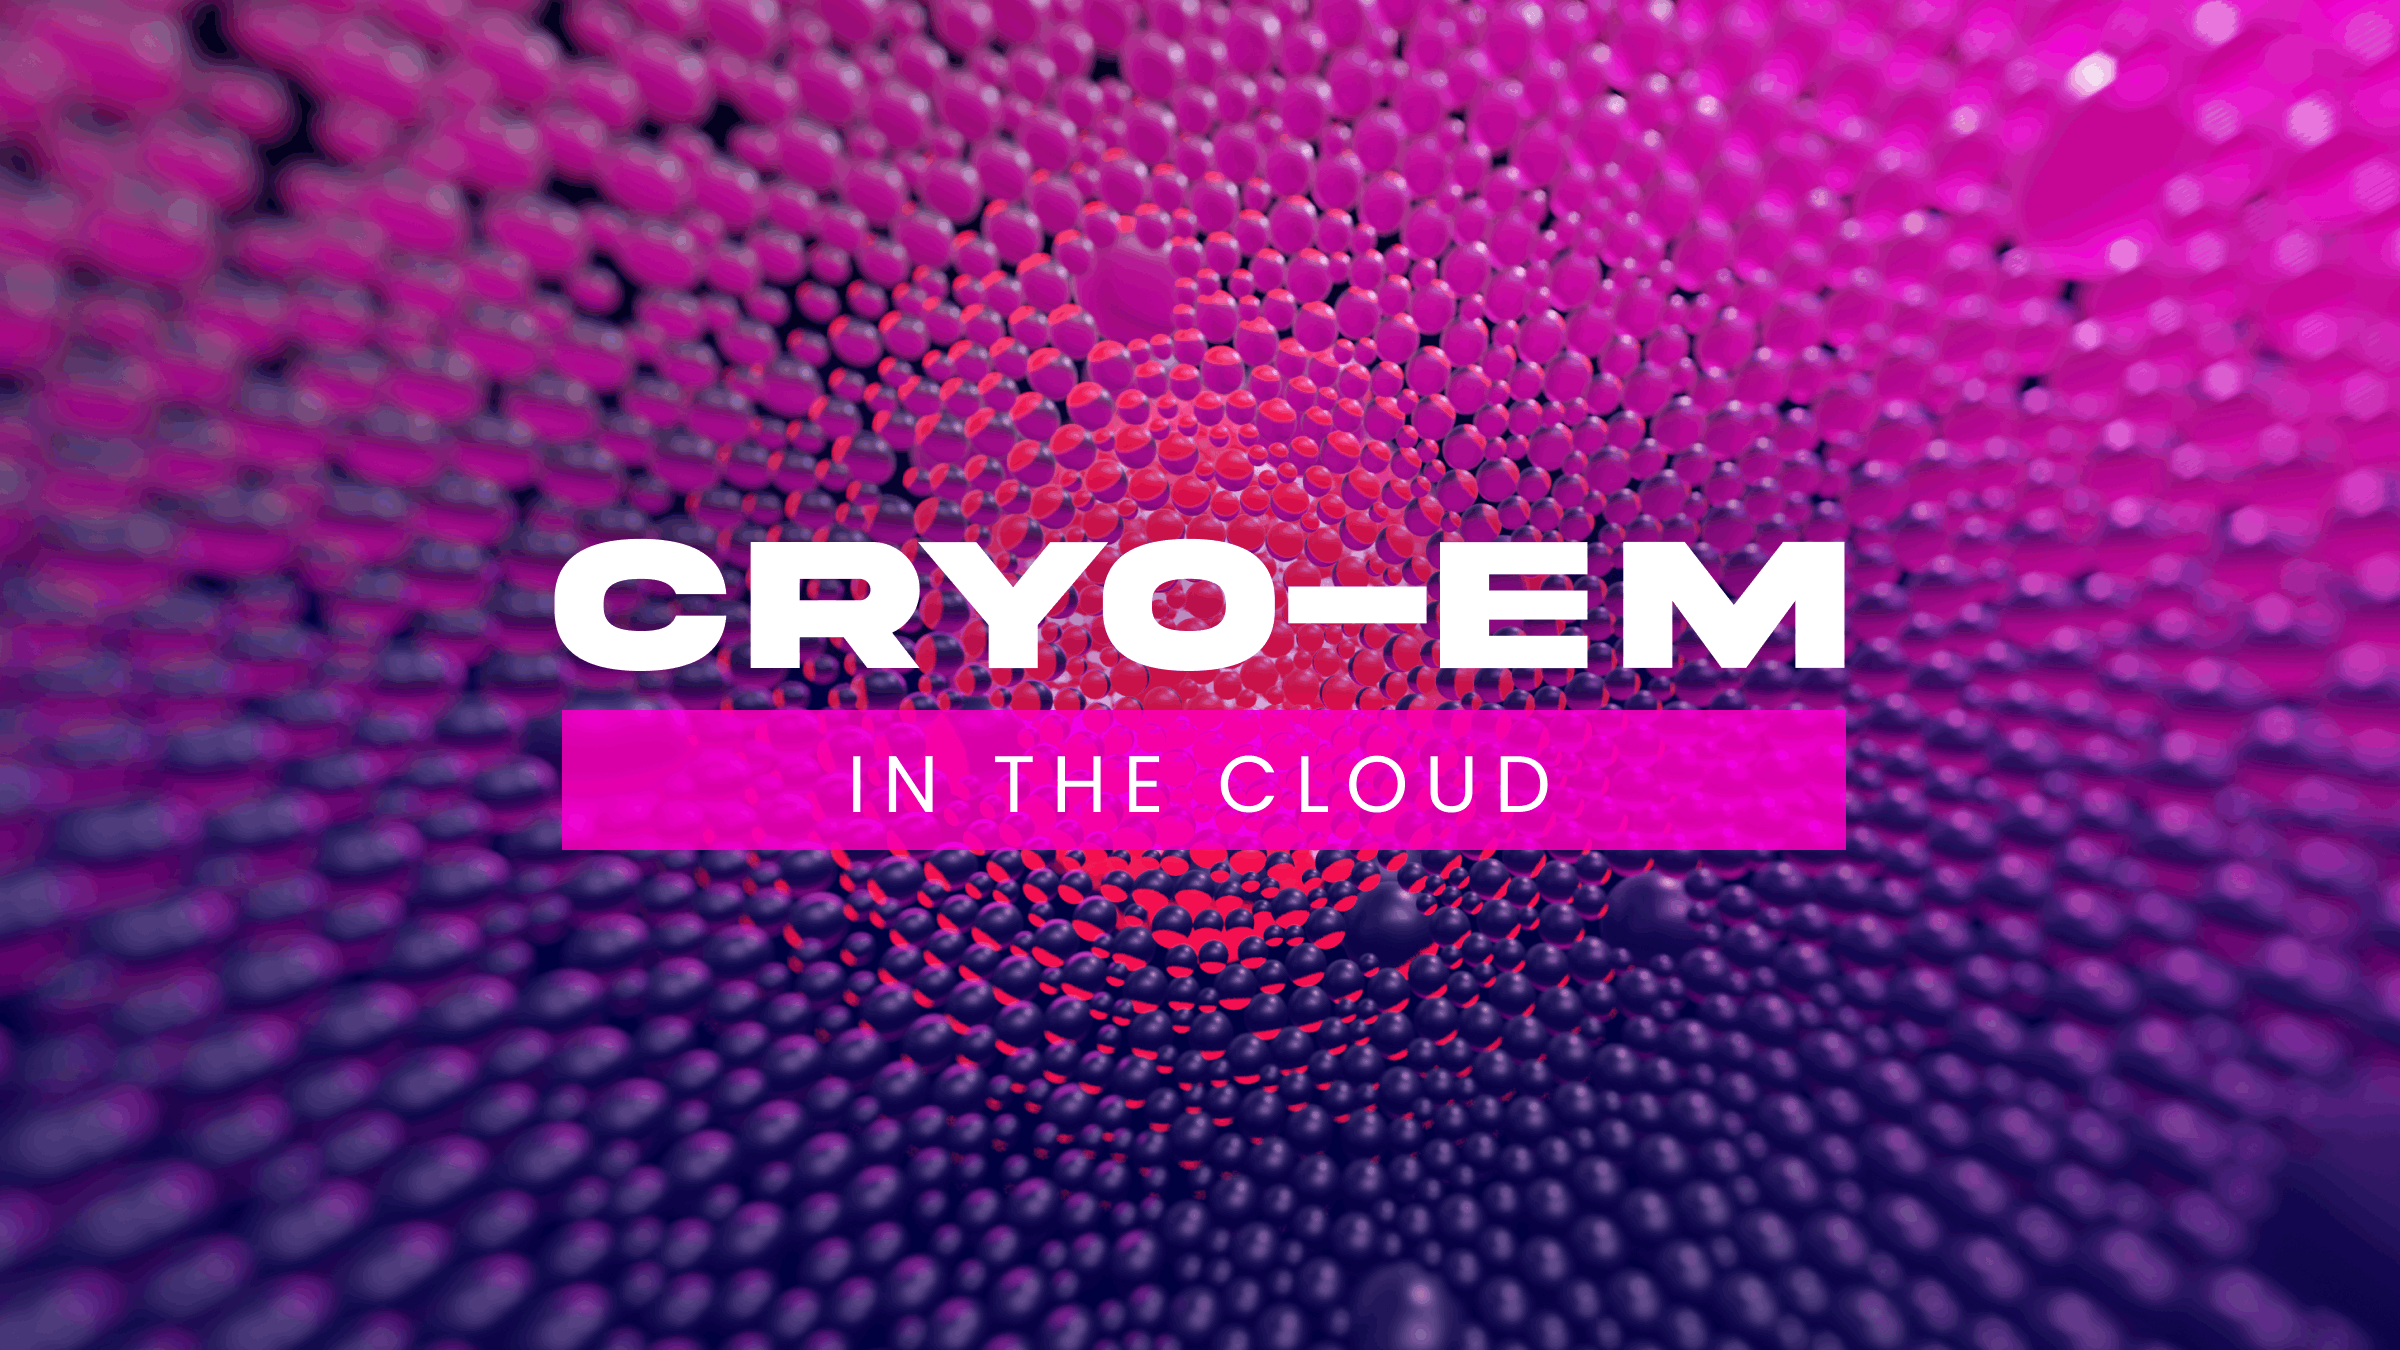 Accelerate Drug Discovery with Cryo-EM in the Cloud